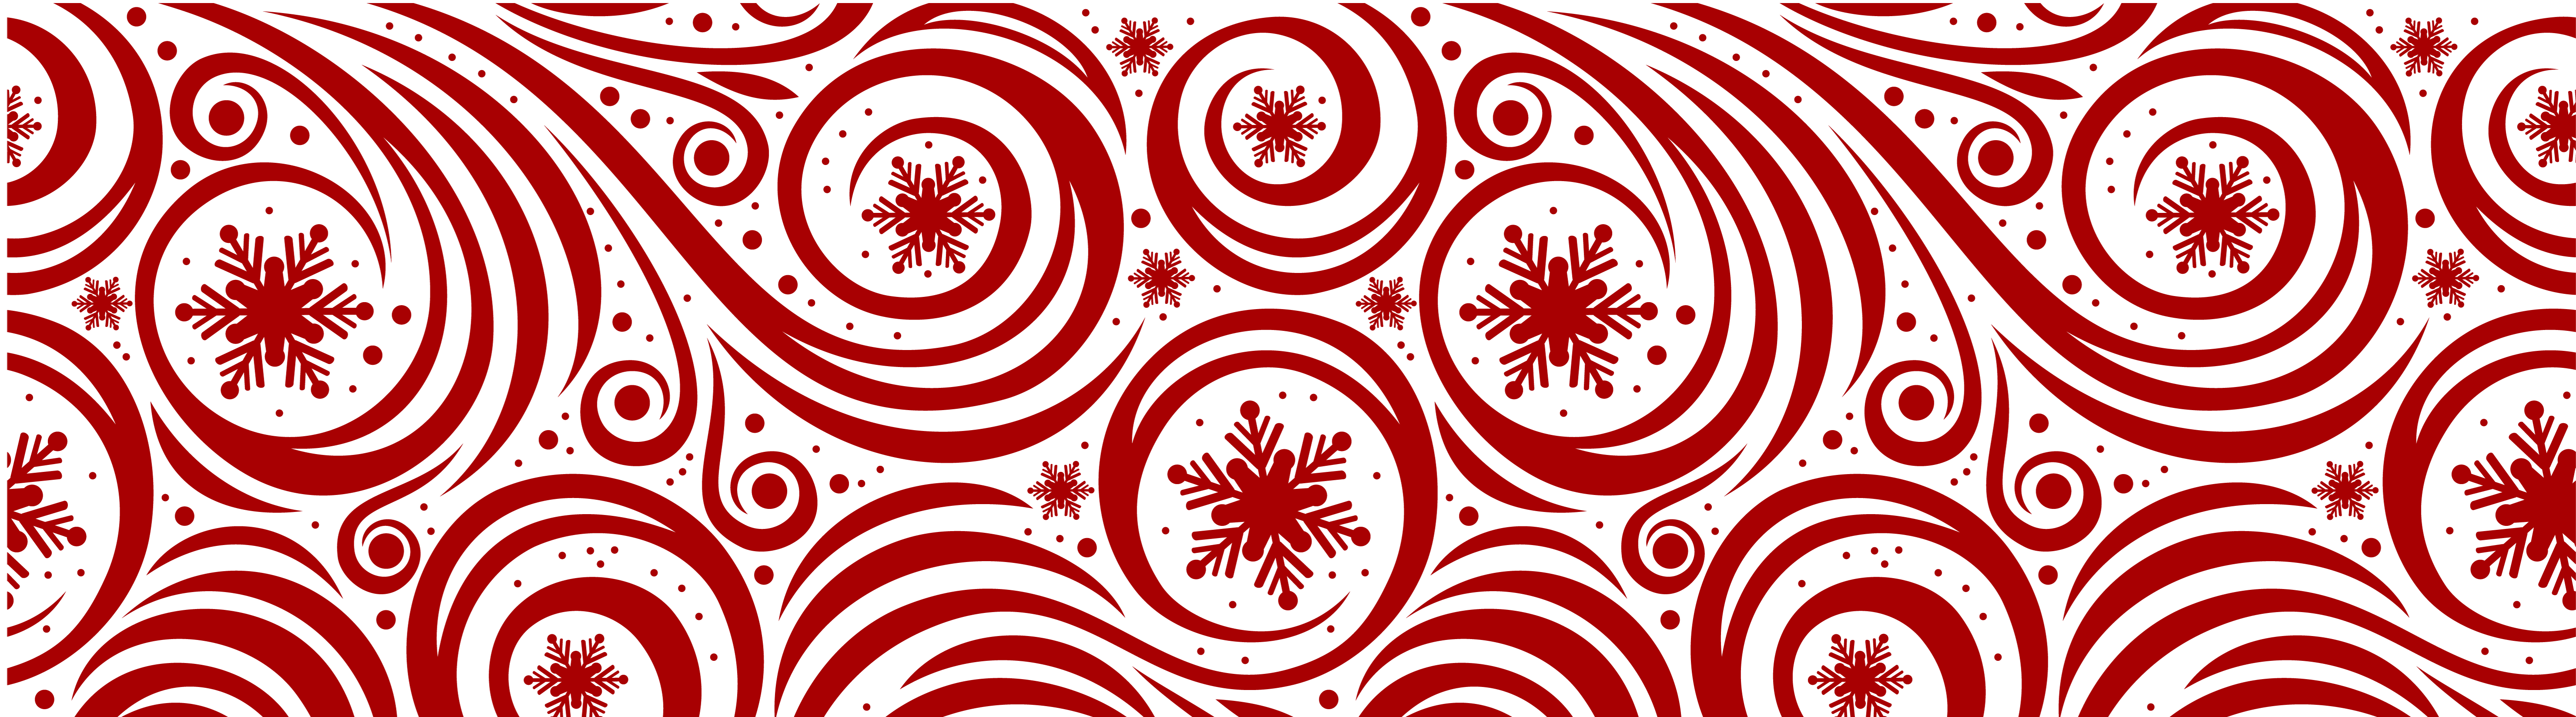 Transparent Red Christmas Decoration for Wallpapers Clipart?m=1383260400